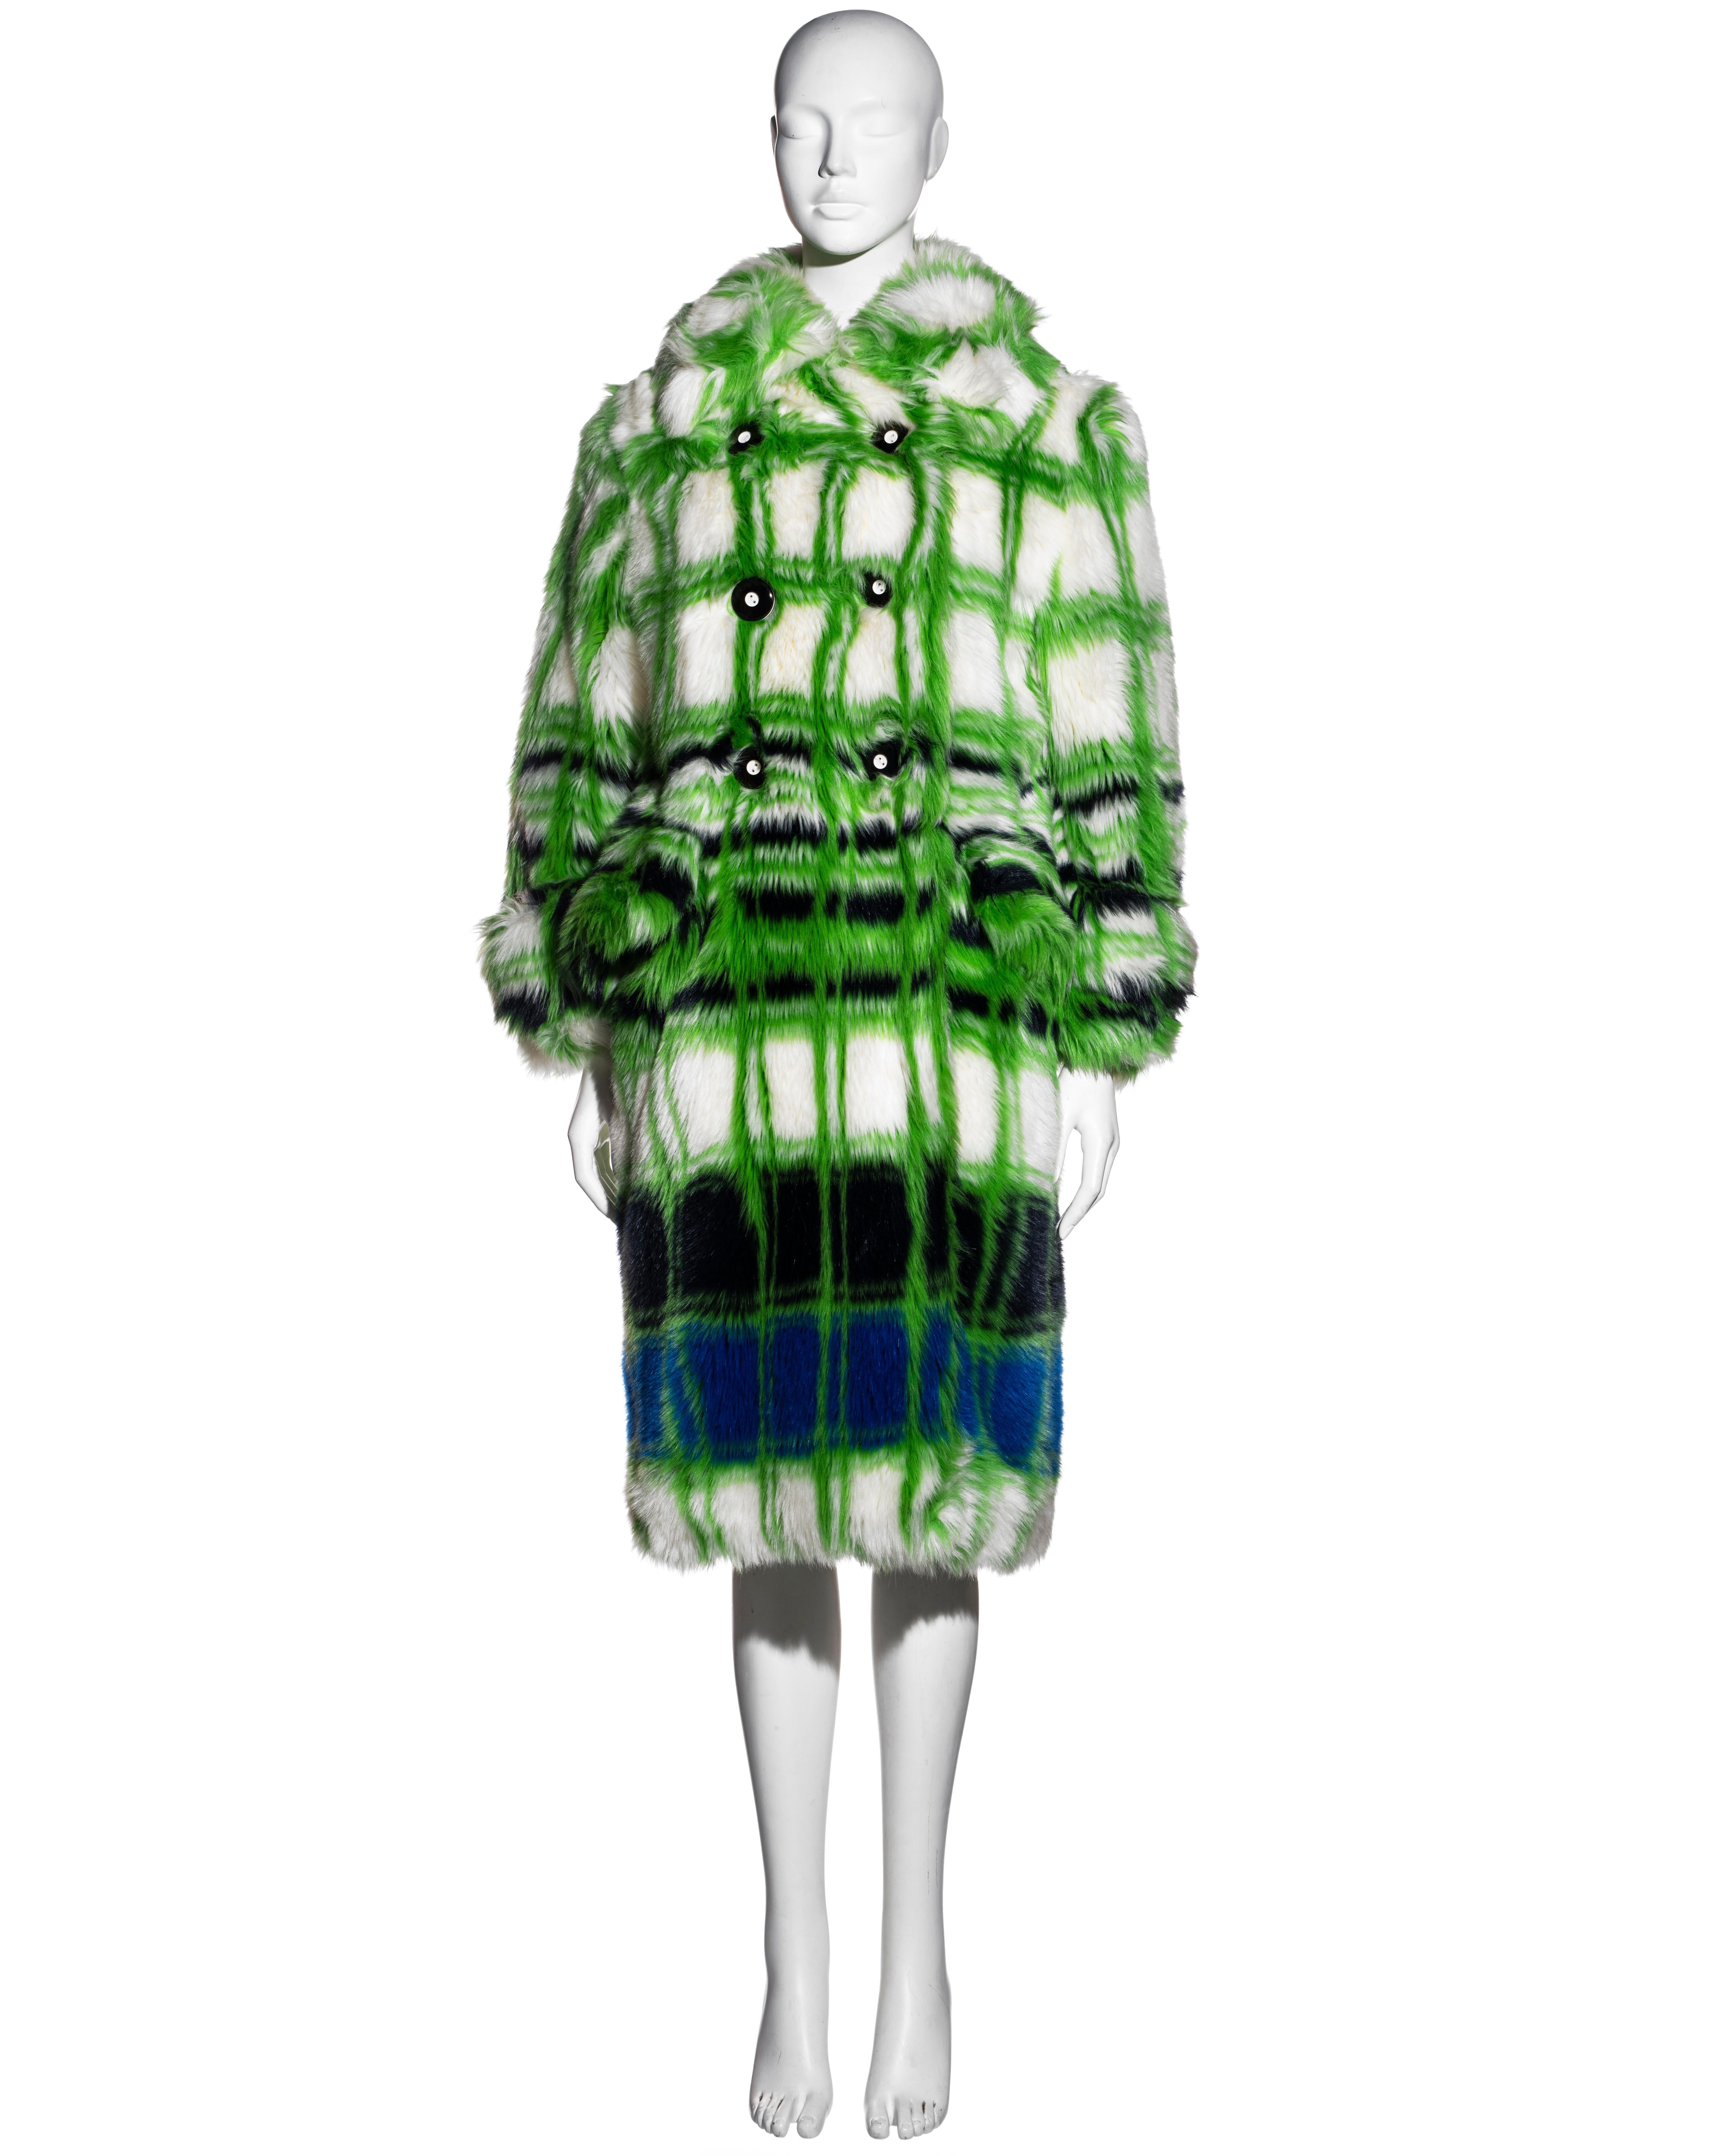 ▪ Miu Miu green and white checked faux fur double-breasted coat
▪ Large black and white buttons
▪ Buttoned sleeve tabs
▪ Two front flap pockets
▪ Fully lined
▪ Weighted fabric
▪ 100% Modacrylic
▪ Size Small
▪ Fall-Winter 2017